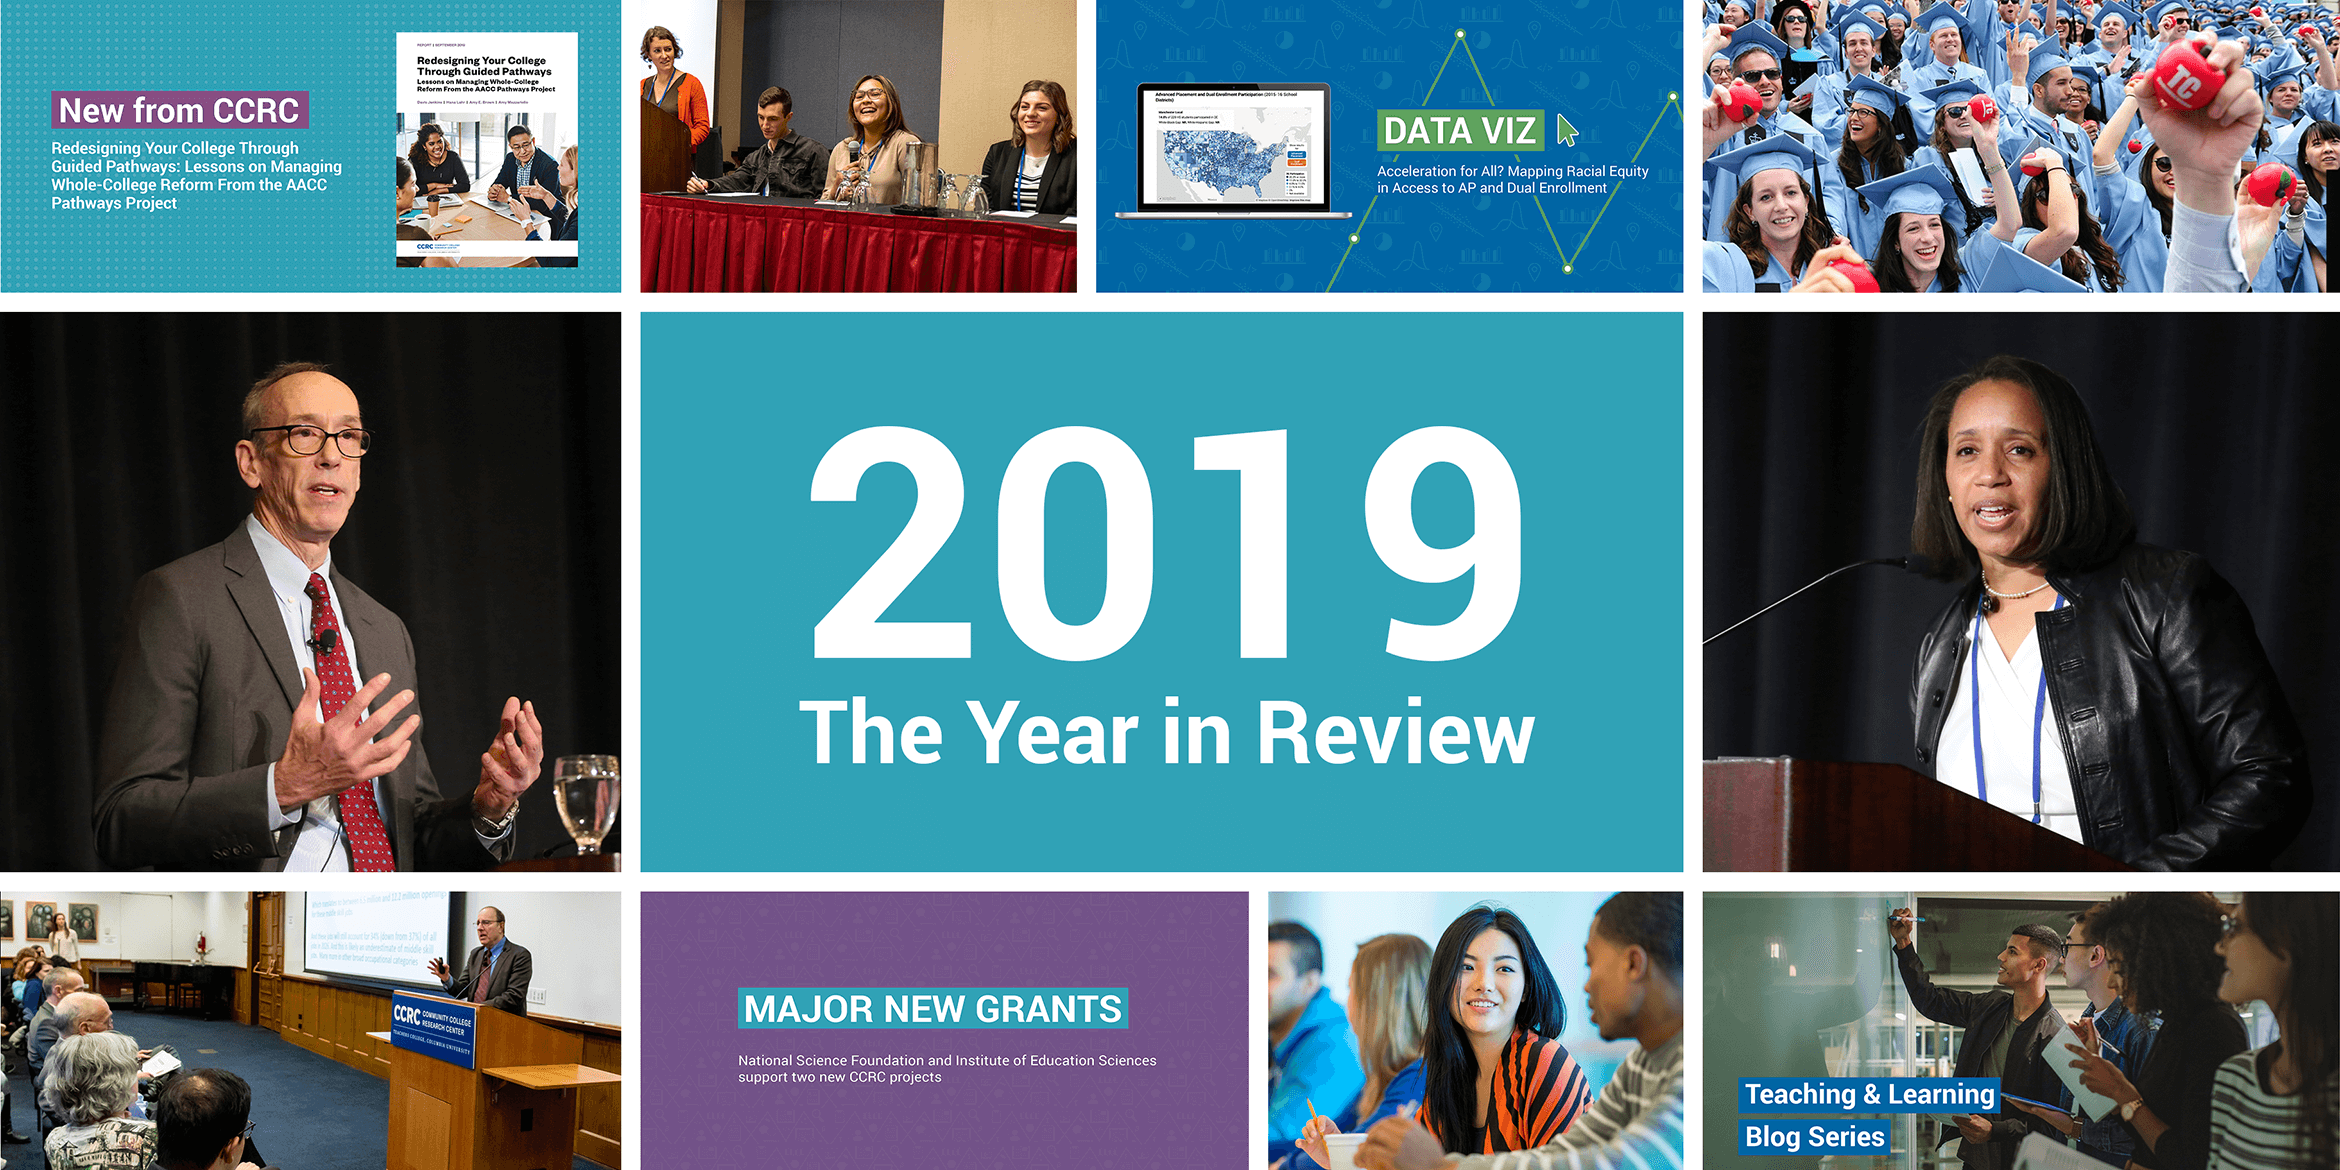 Images of Thomas Brock, Nikki Edgecombe, new papers, TC graduation, and the CAPR conference surround a block that reads 2019: The Year in Review